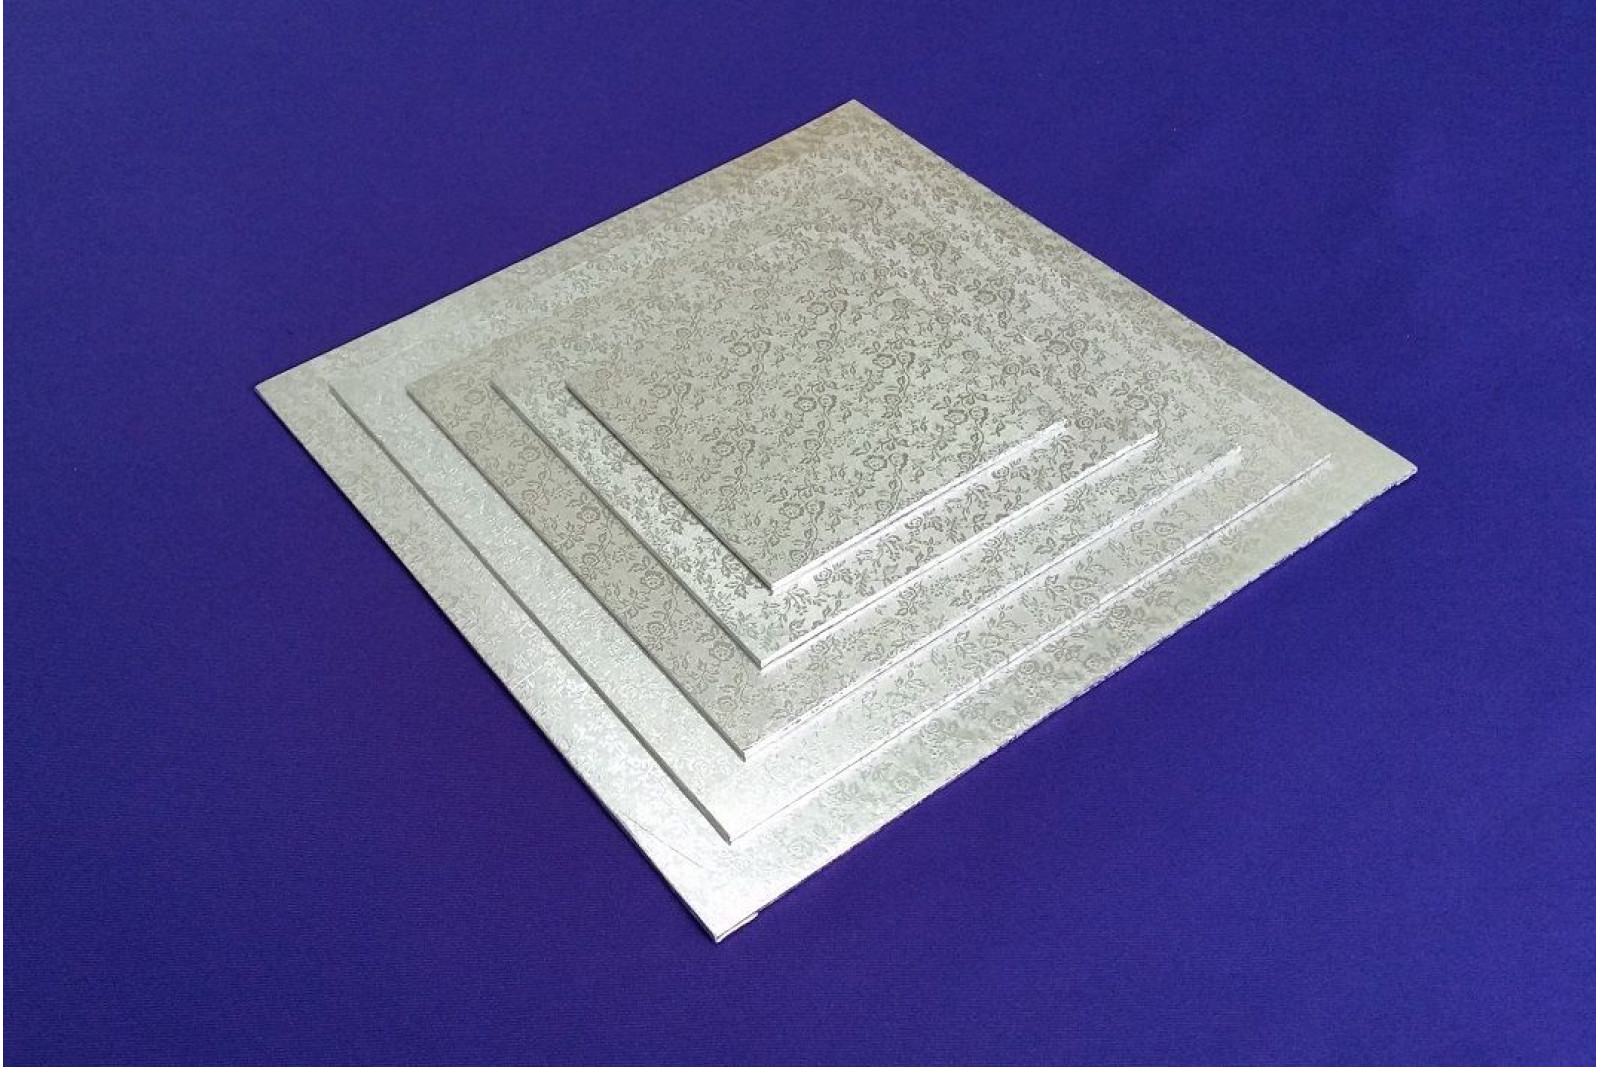 8 Inch | Silver | Square 3 mm | Cake Boards Masonite | Premium Quality | Great Christmas Bake Off